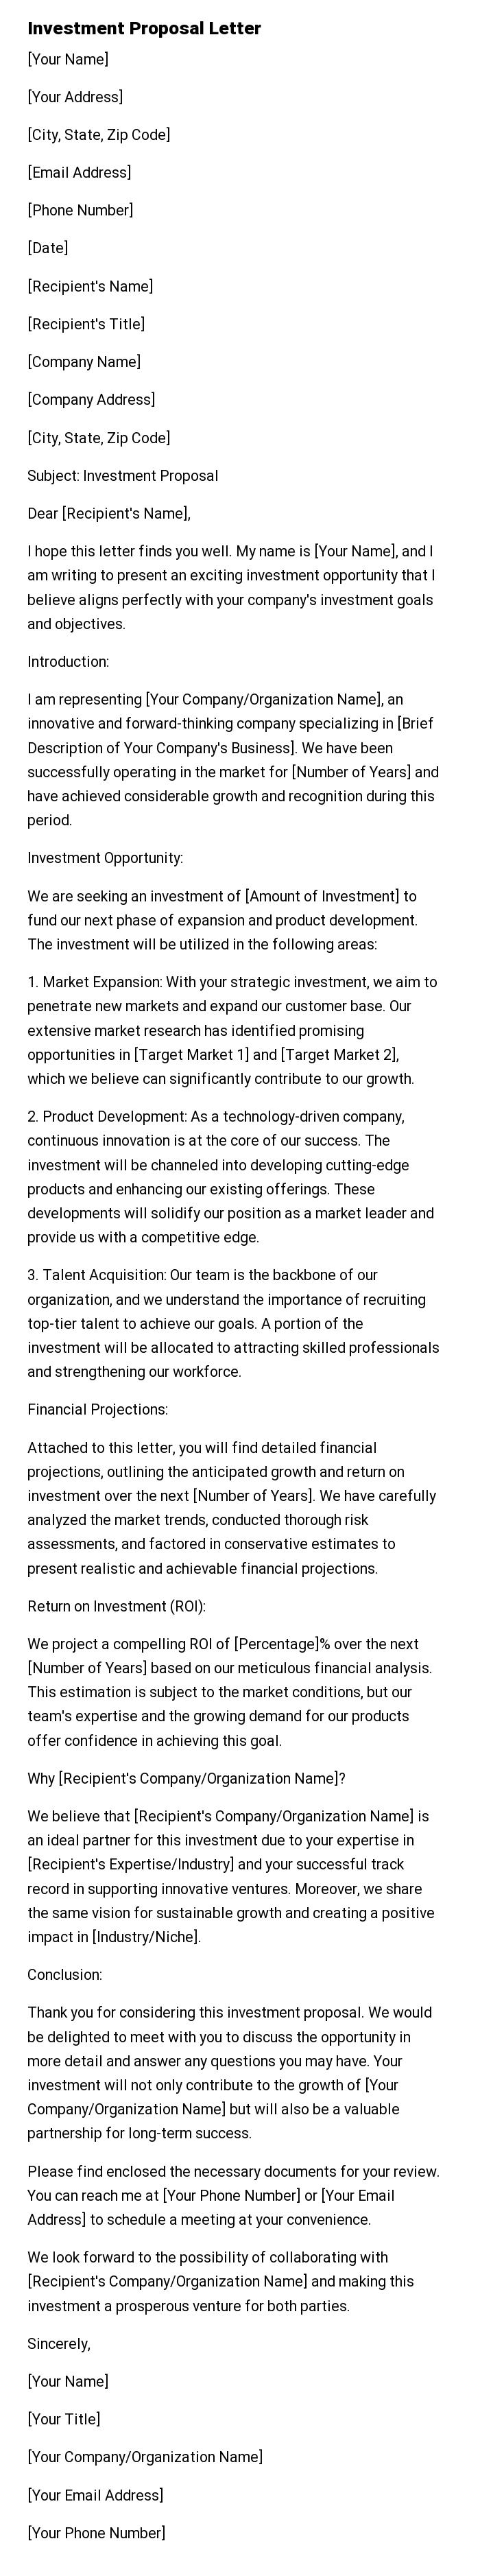 Investment Proposal Letter